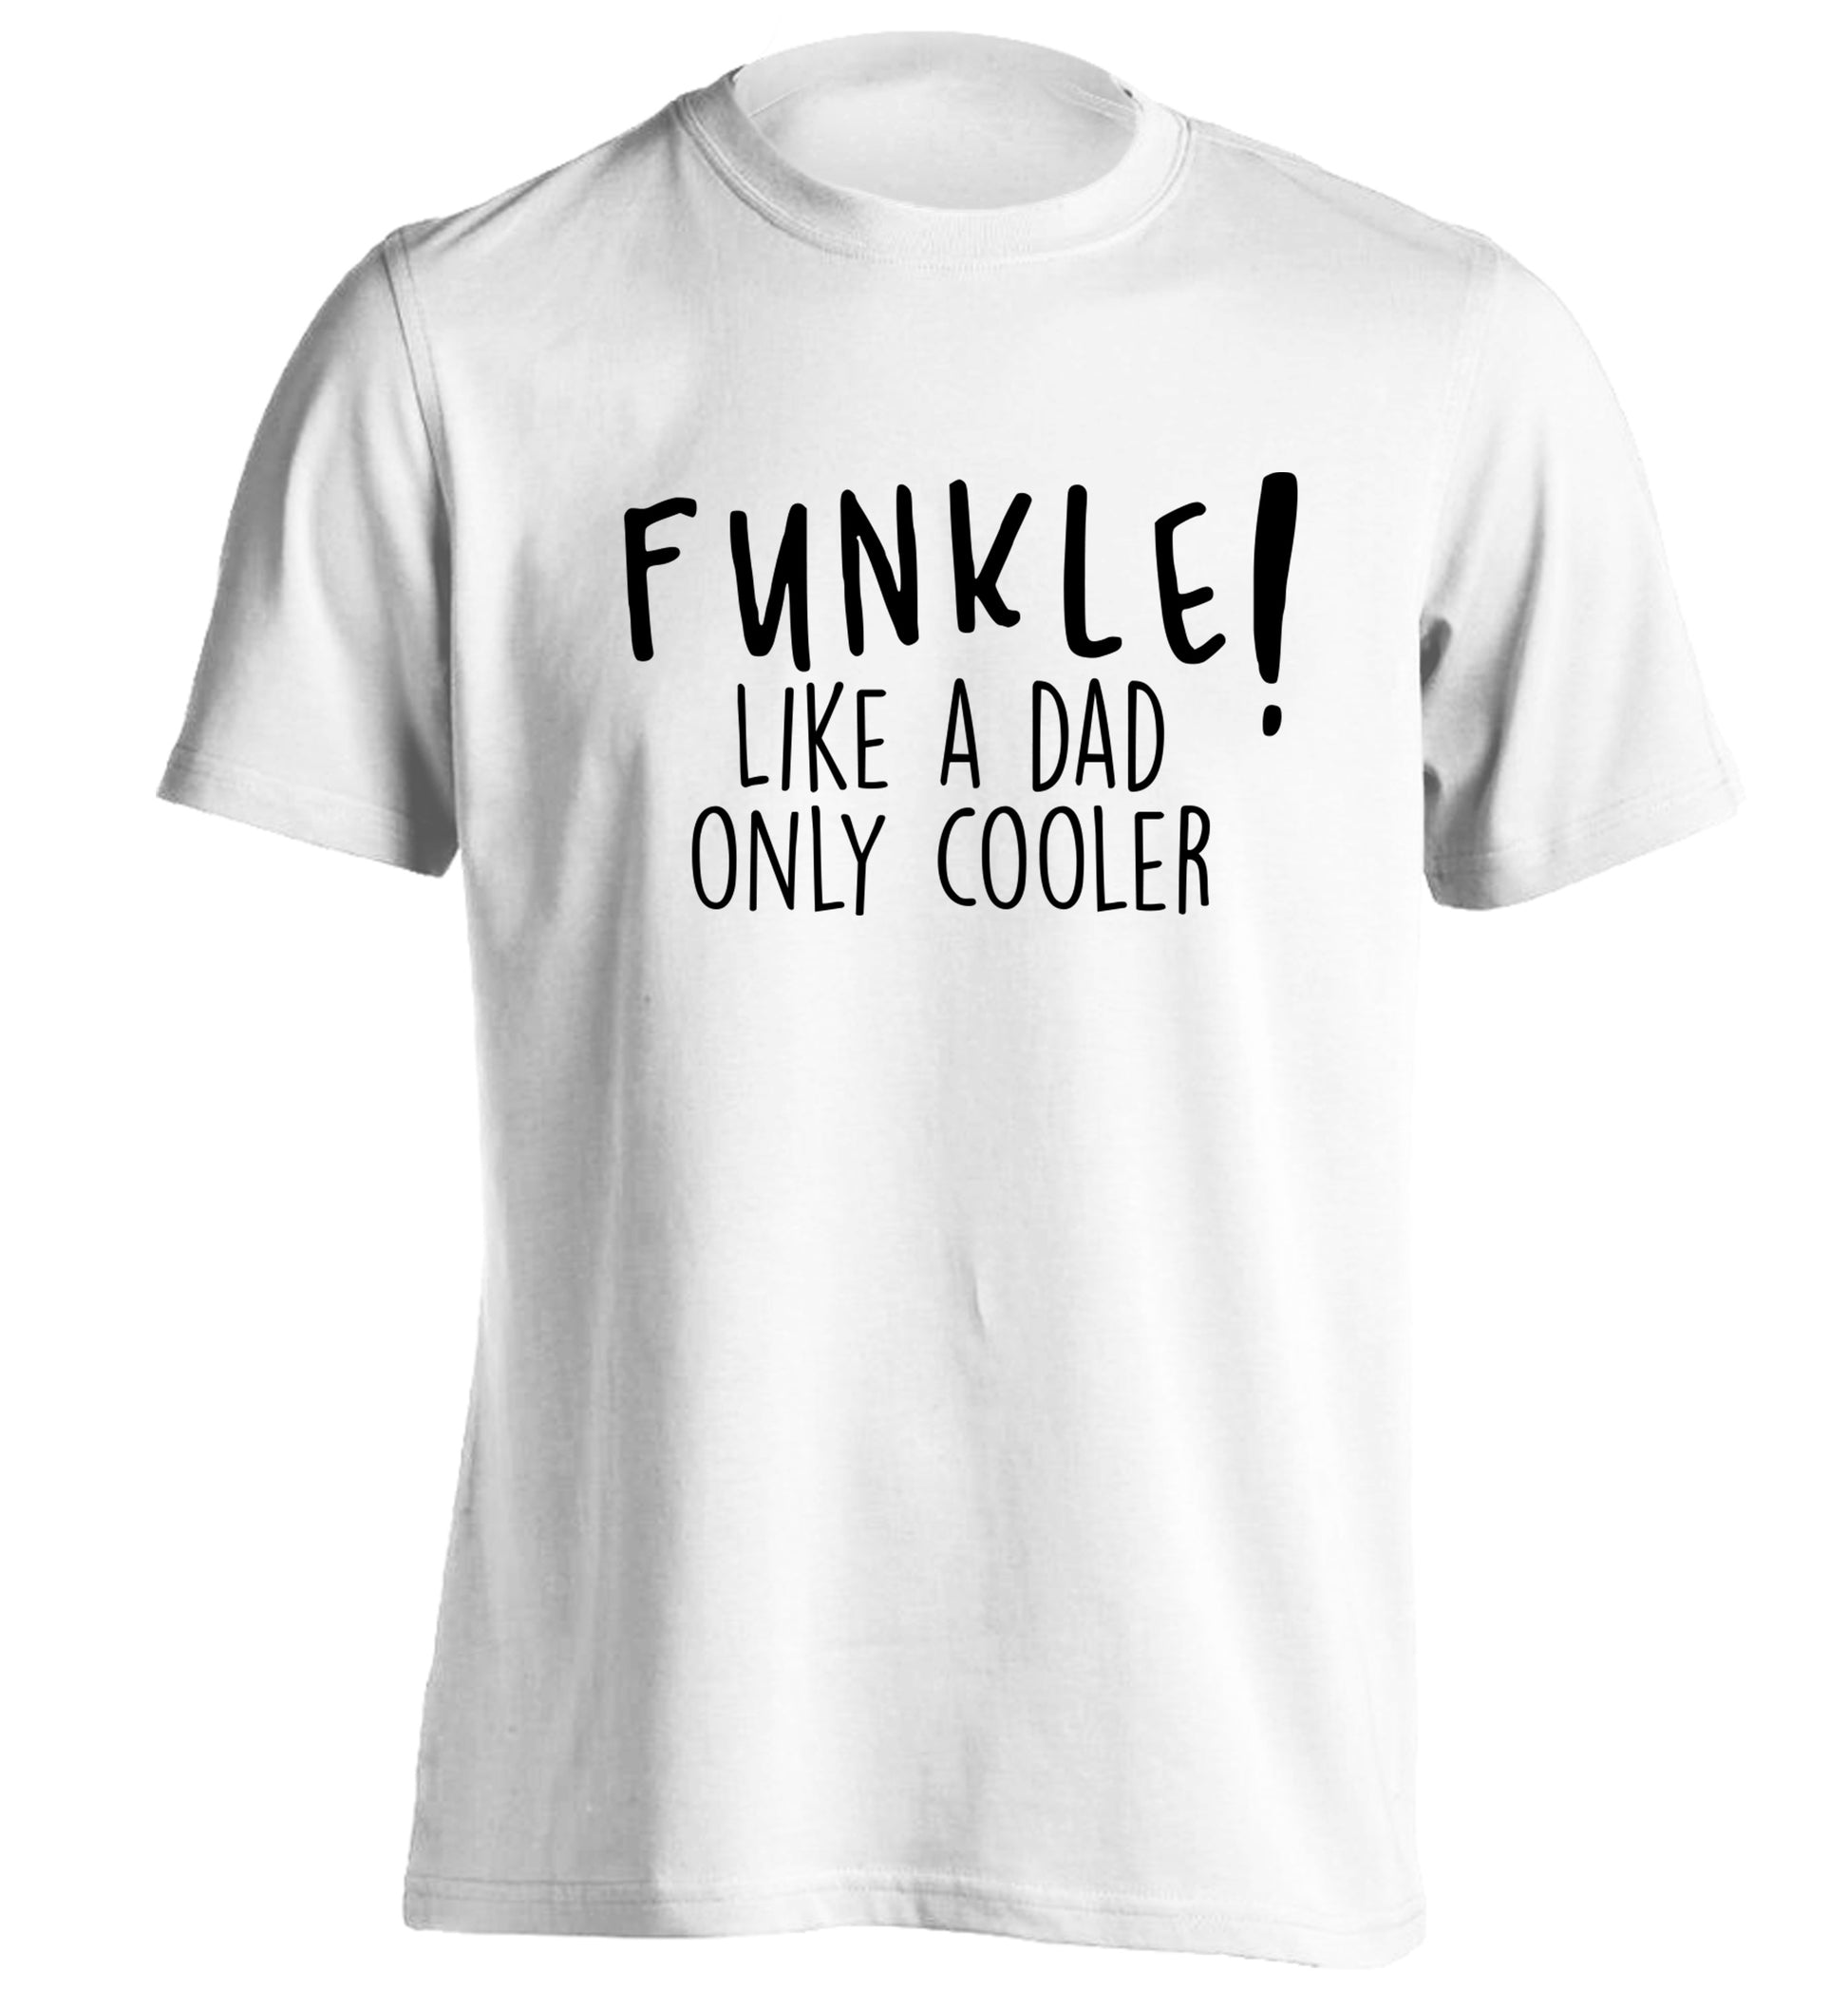 Funkle Like a Dad Only Cooler adults unisex white Tshirt 2XL